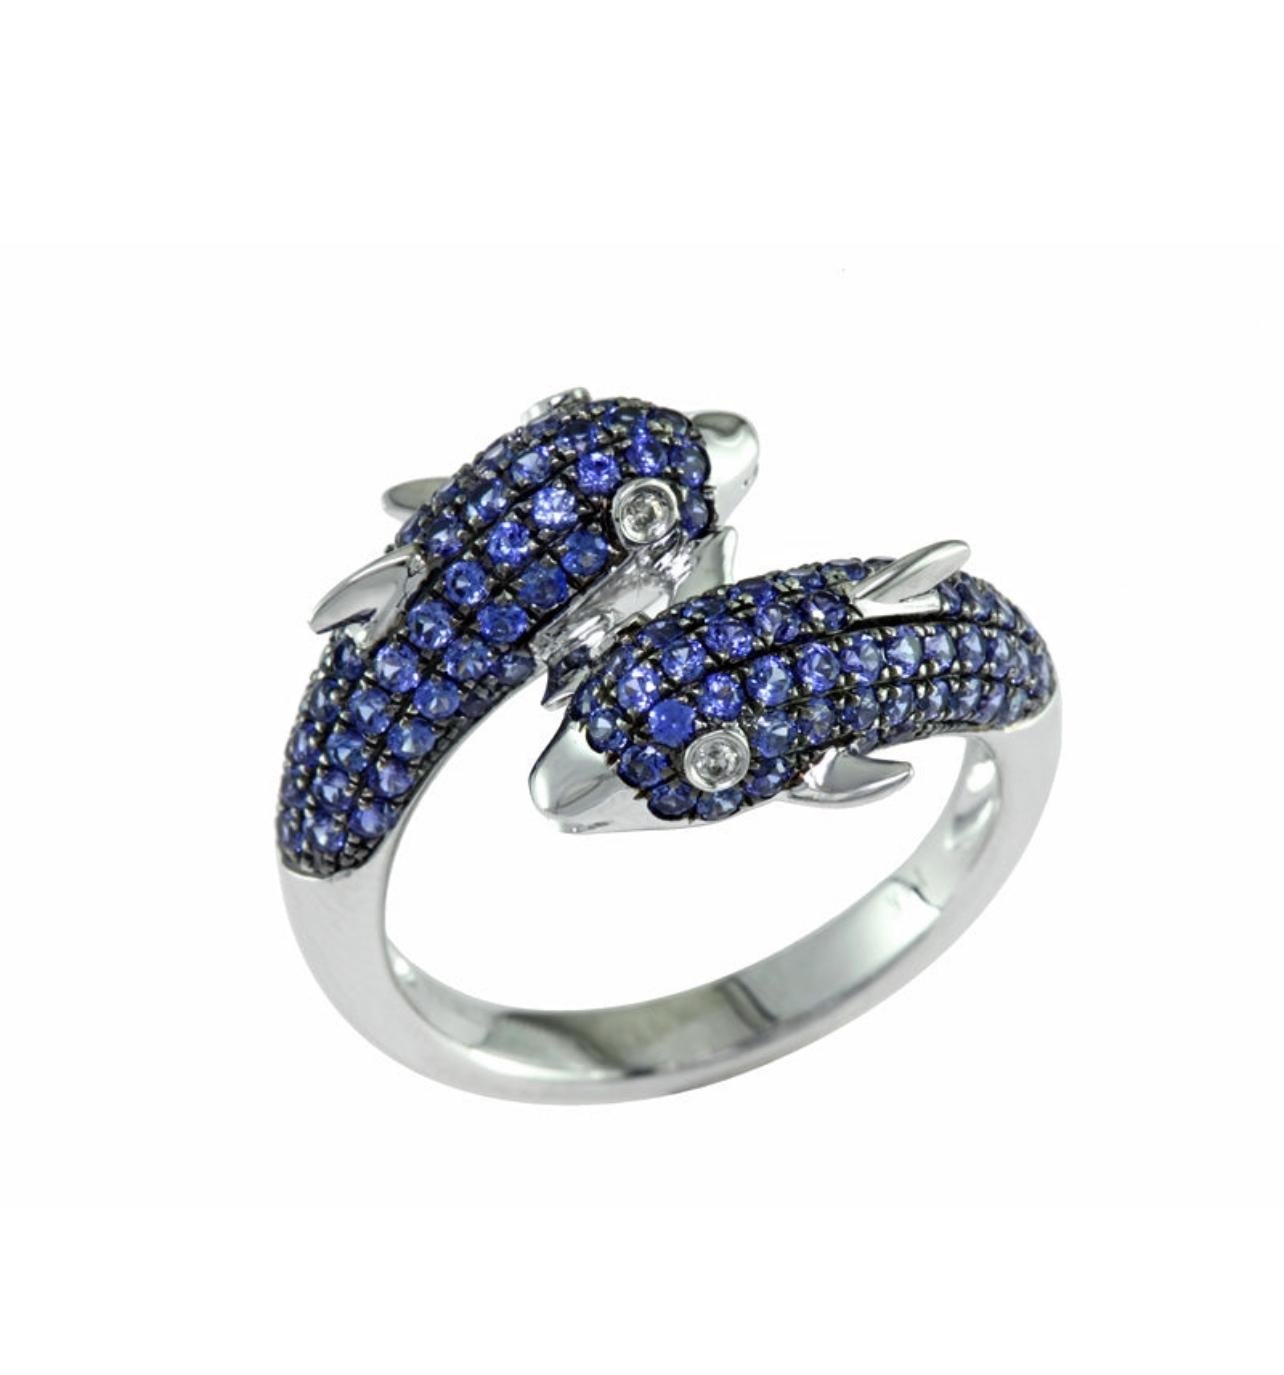 Sapphire and Diamond Dolphin Ring

Additional Information:
Metal Type : 14K White Gold
Ring Size : 7.00
Brand : Effy 
Sapphire Shape : Round
Weight : 1.22 ctw

Diamond Weight : 0.02 ctw
Color : H-I
Clarity : SI2-I1